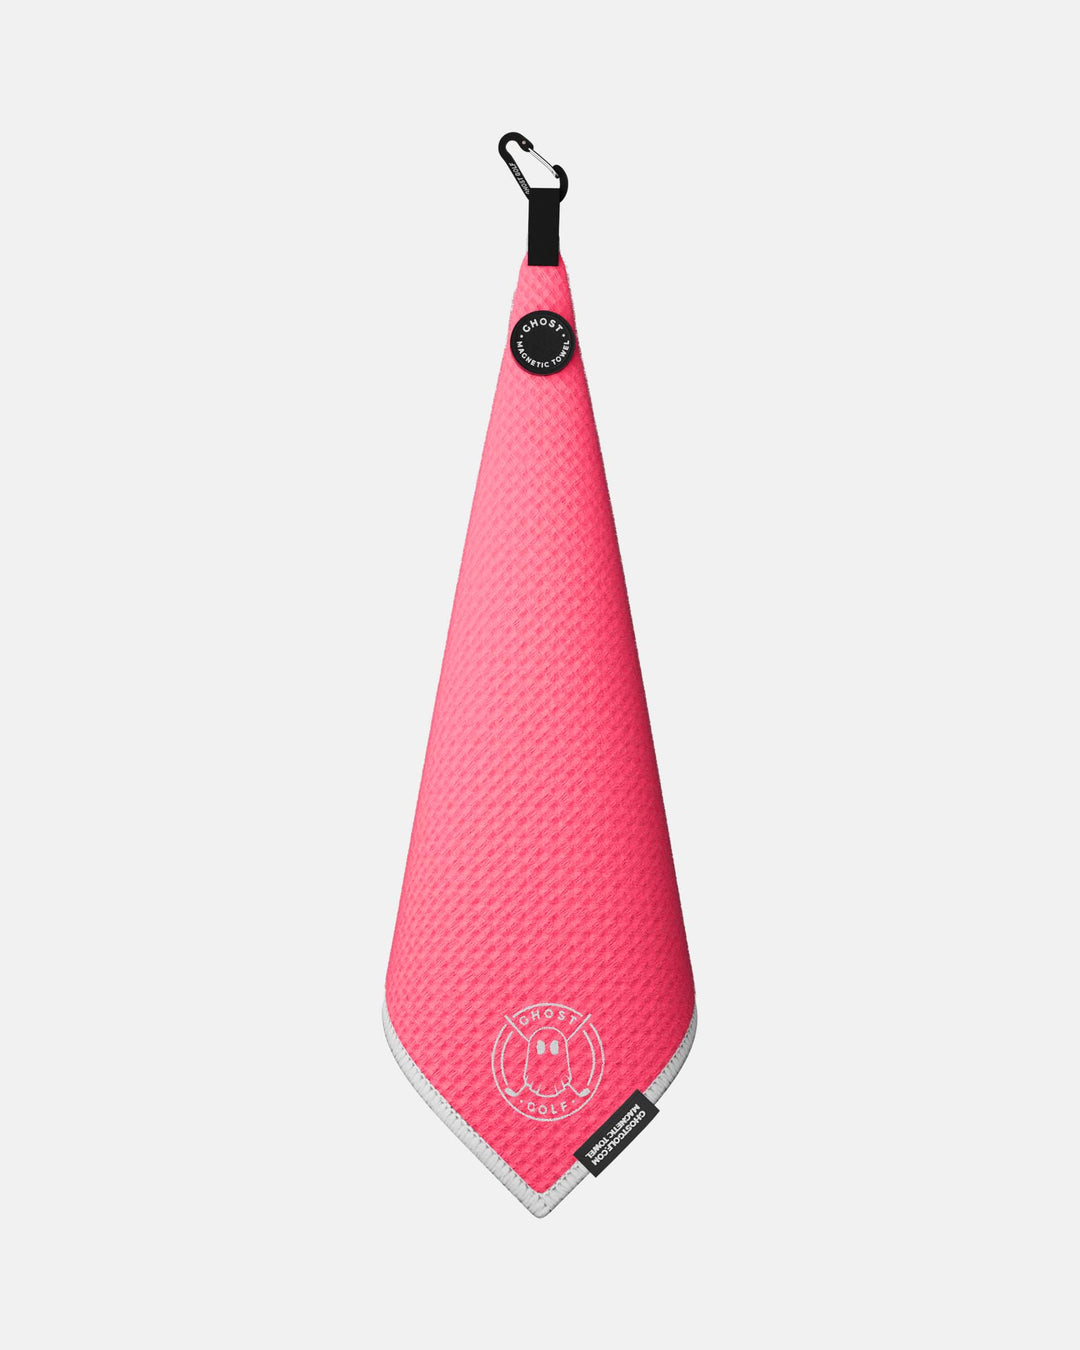 Greenside Towel with Magnet Patch and Carabiner. Hot Pink